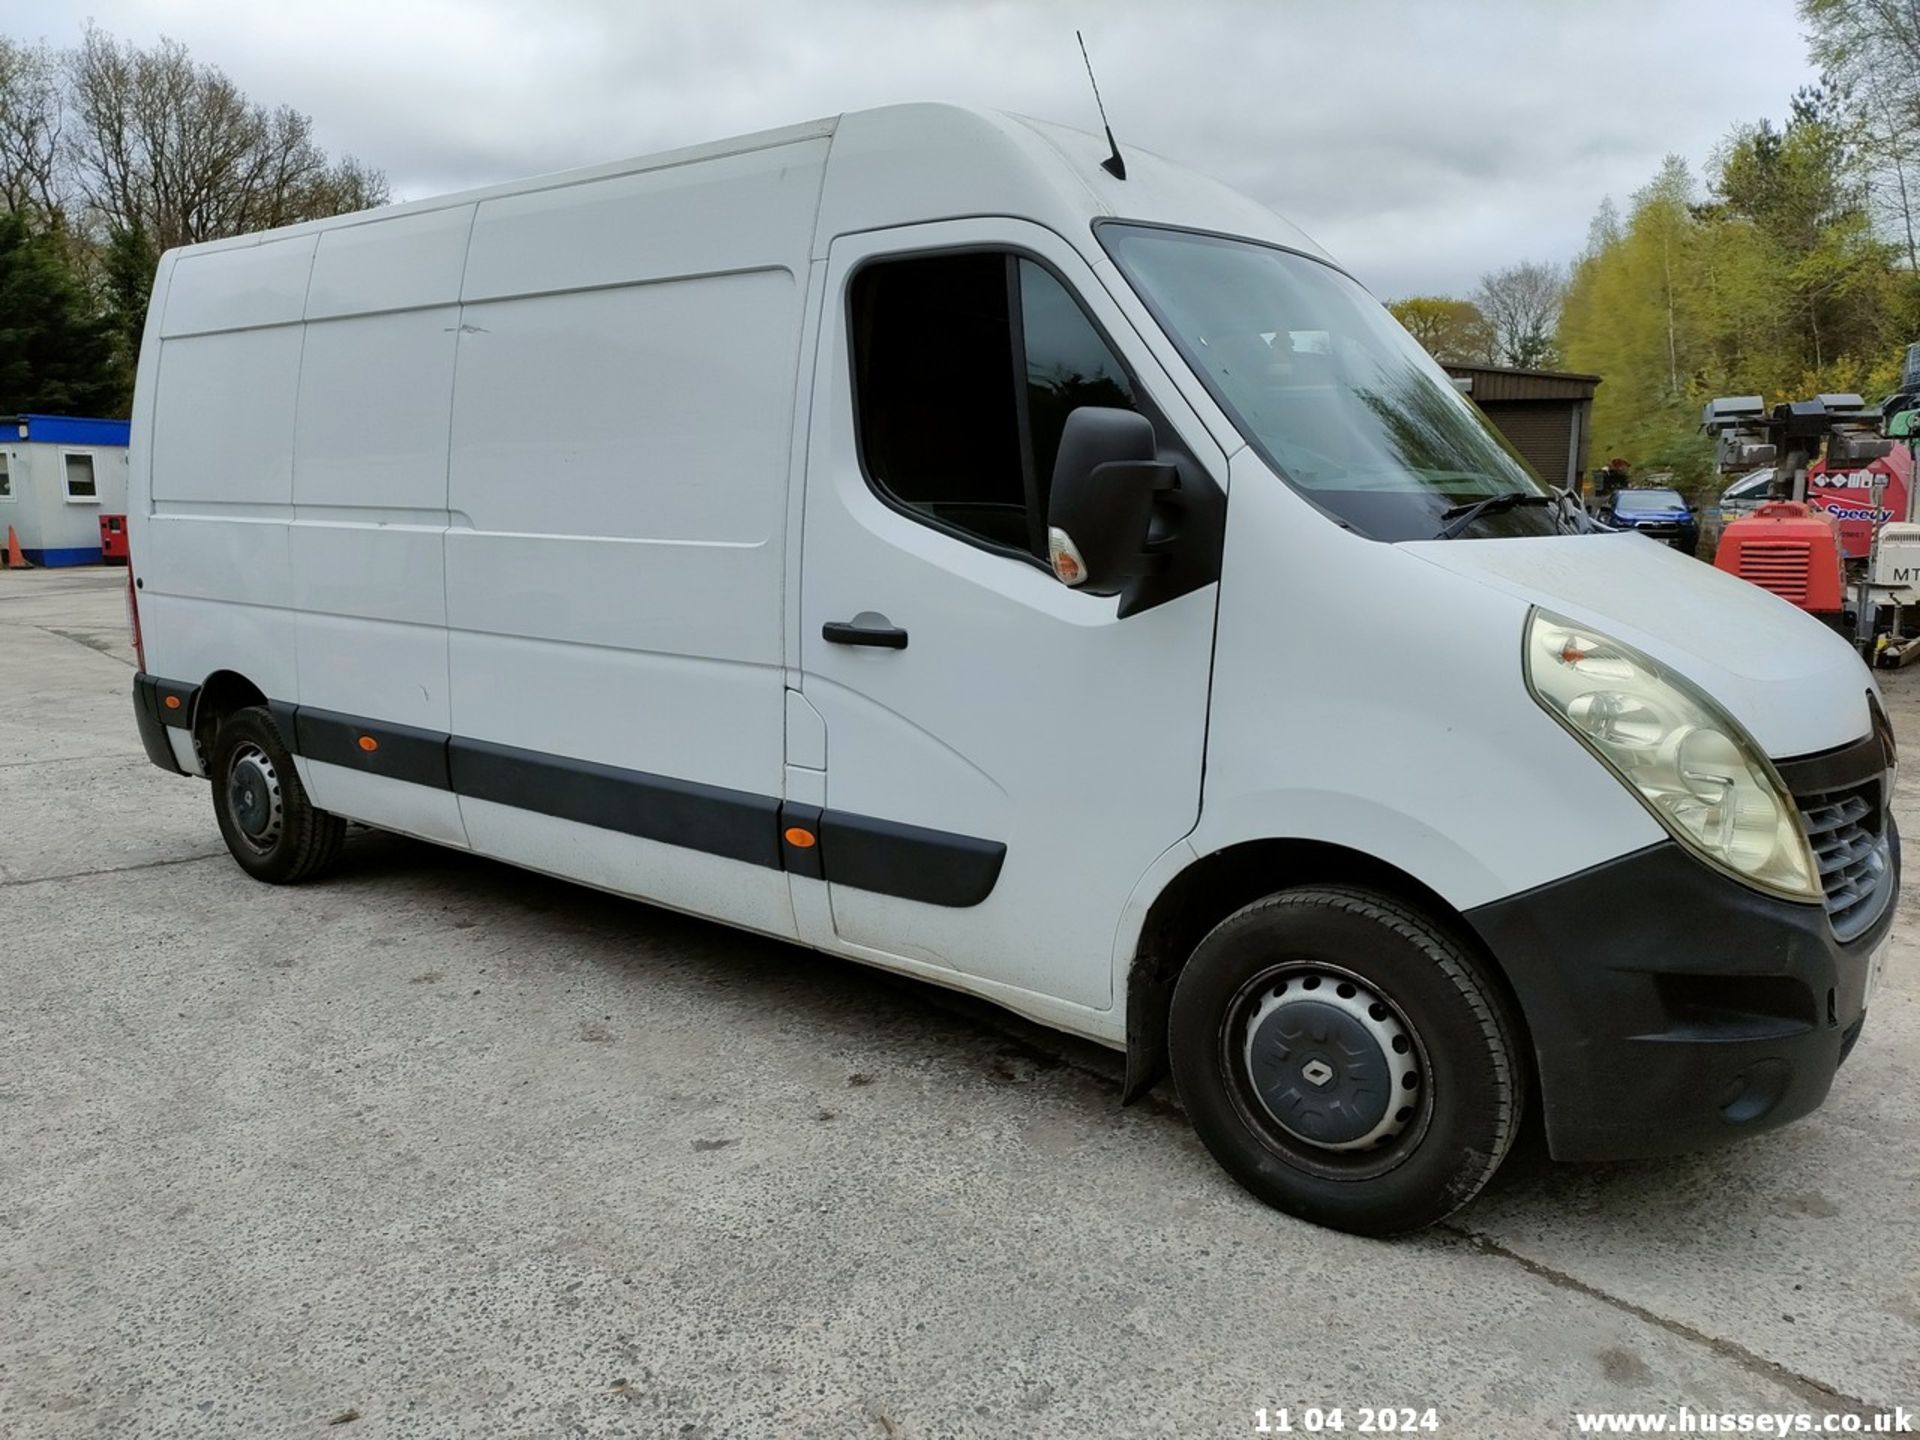 18/68 RENAULT MASTER LM35 BUSINESS DCI - 2298cc 5dr Van (White) - Image 47 of 68